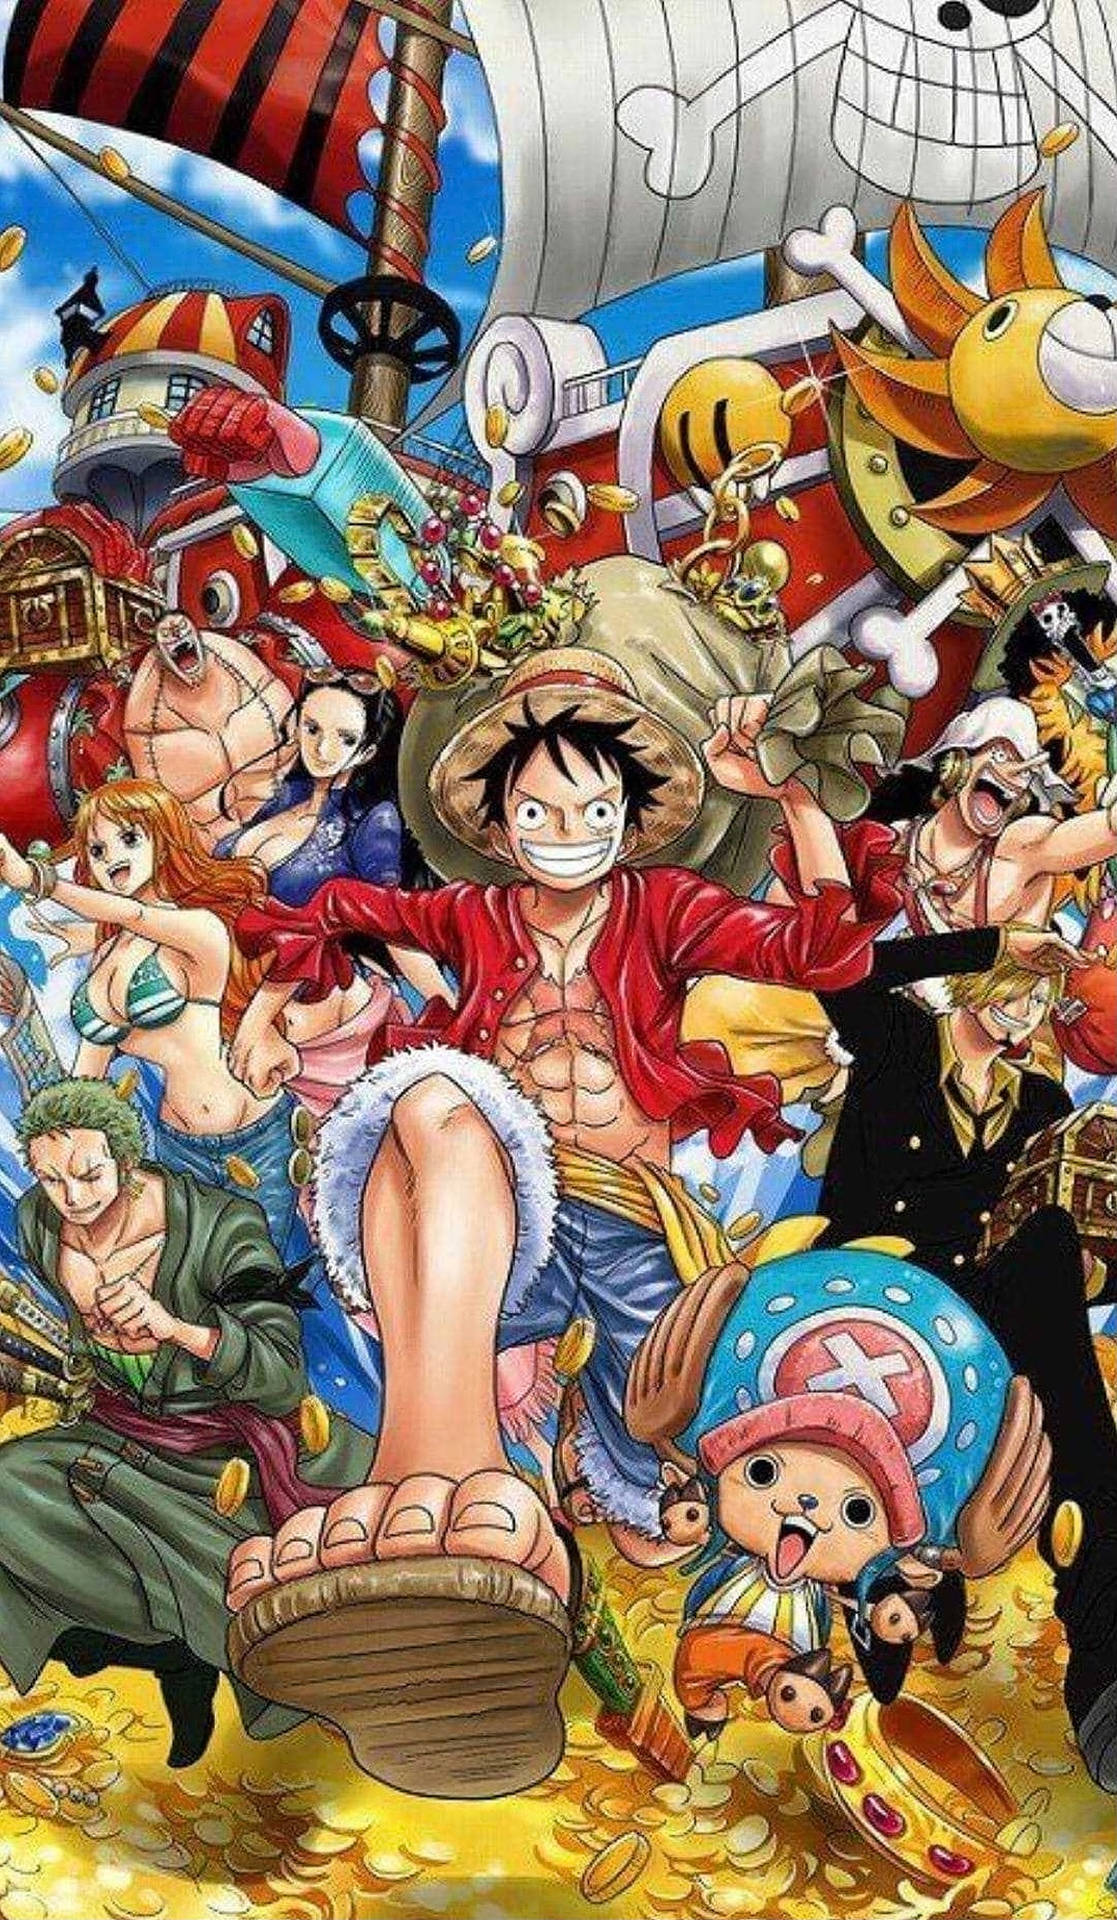 200+] One Piece Iphone Wallpapers | Wallpapers.Com